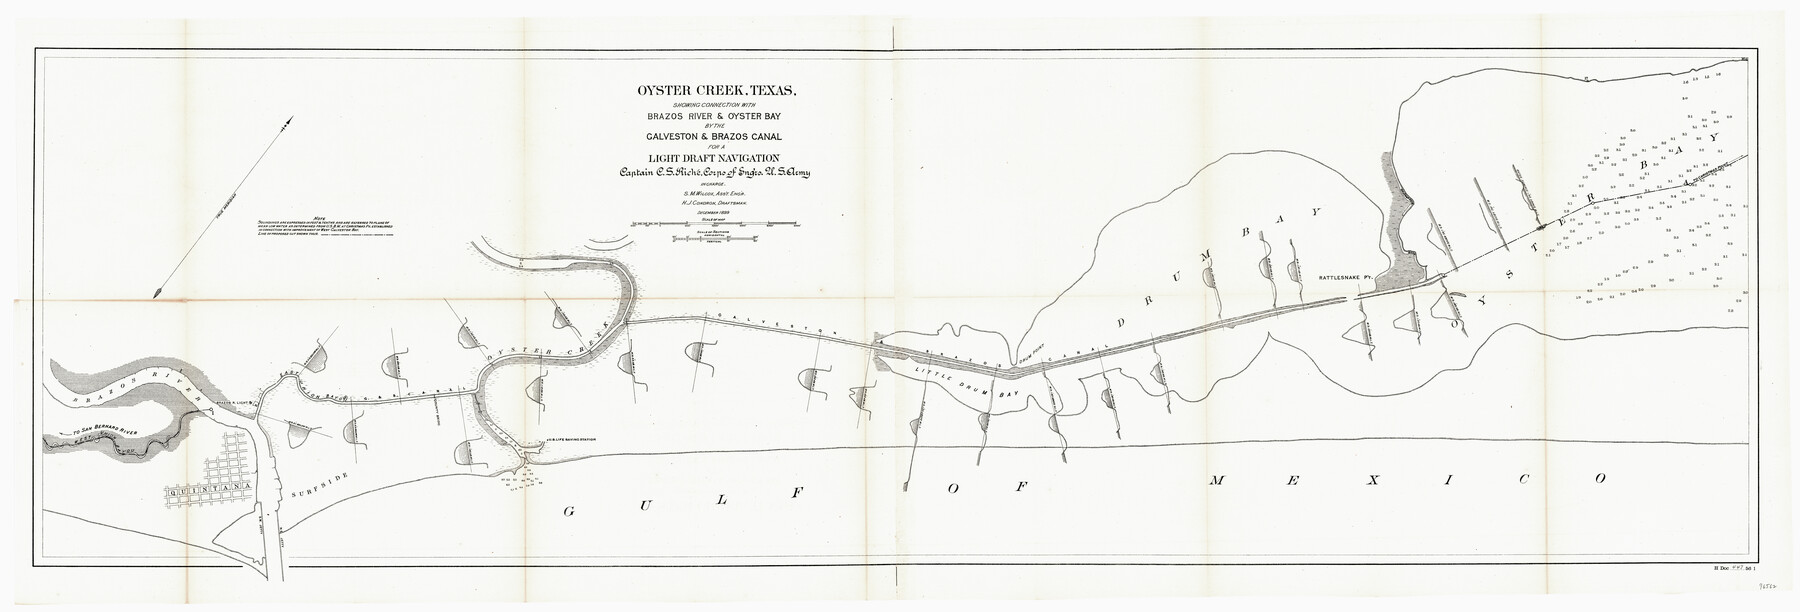 96562, Oyster Creek, Texas showing connection with Brazos River & Oyster Bay by the Galveston & Brazos Canal for a Light Draft Navigation, General Map Collection